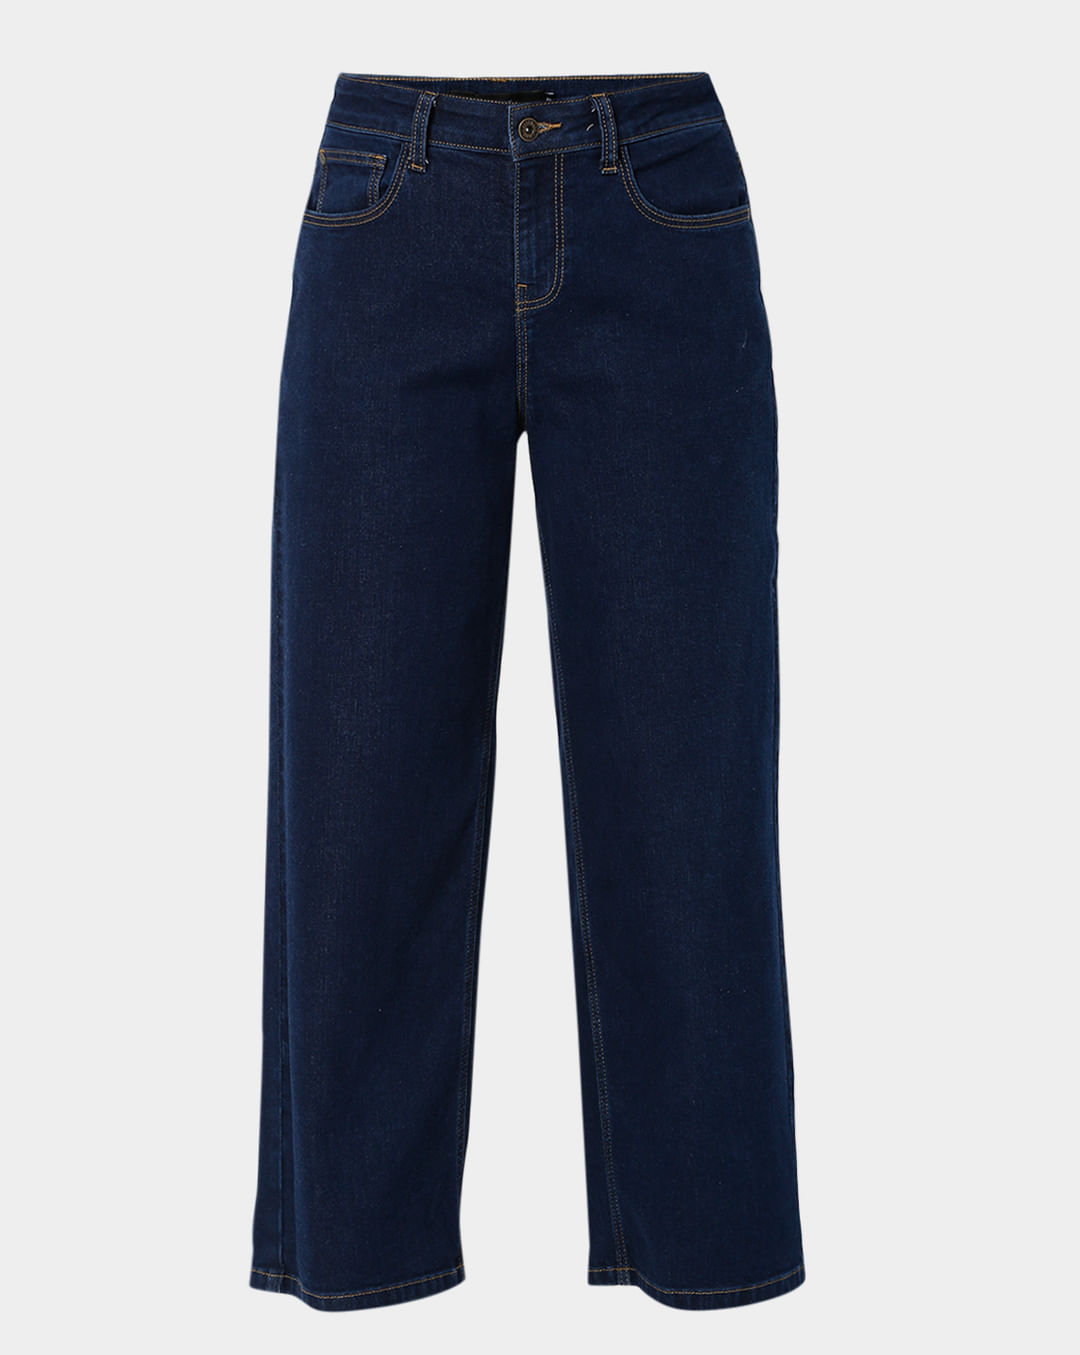 Where can I find a good pair of mid rise wide leg dark wash jeans